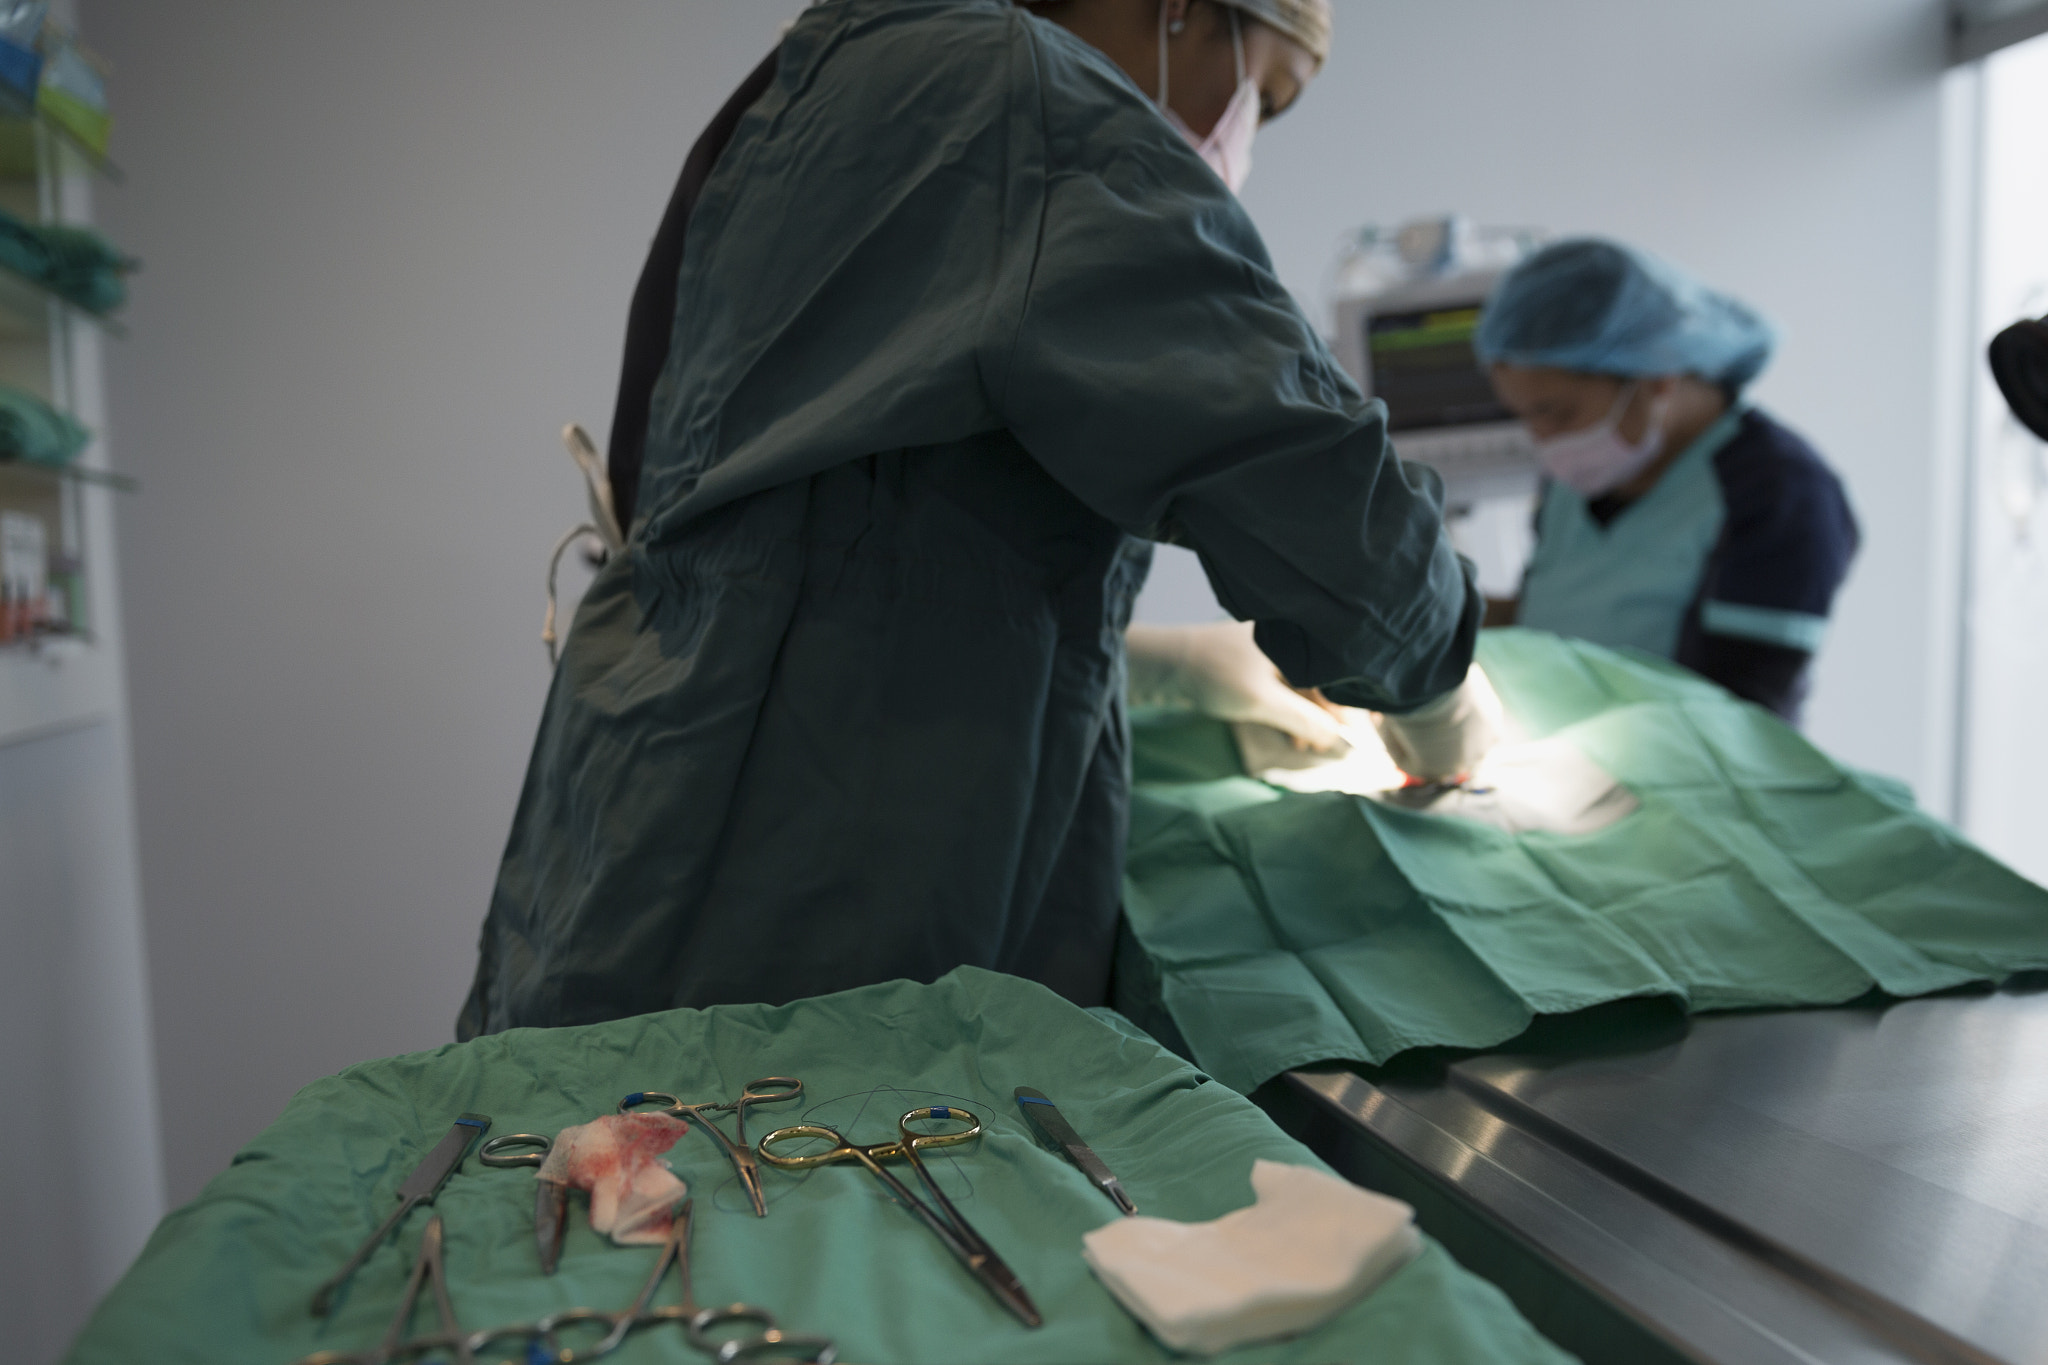 Surgical scissors and gauze behind veterinarian performing surgery